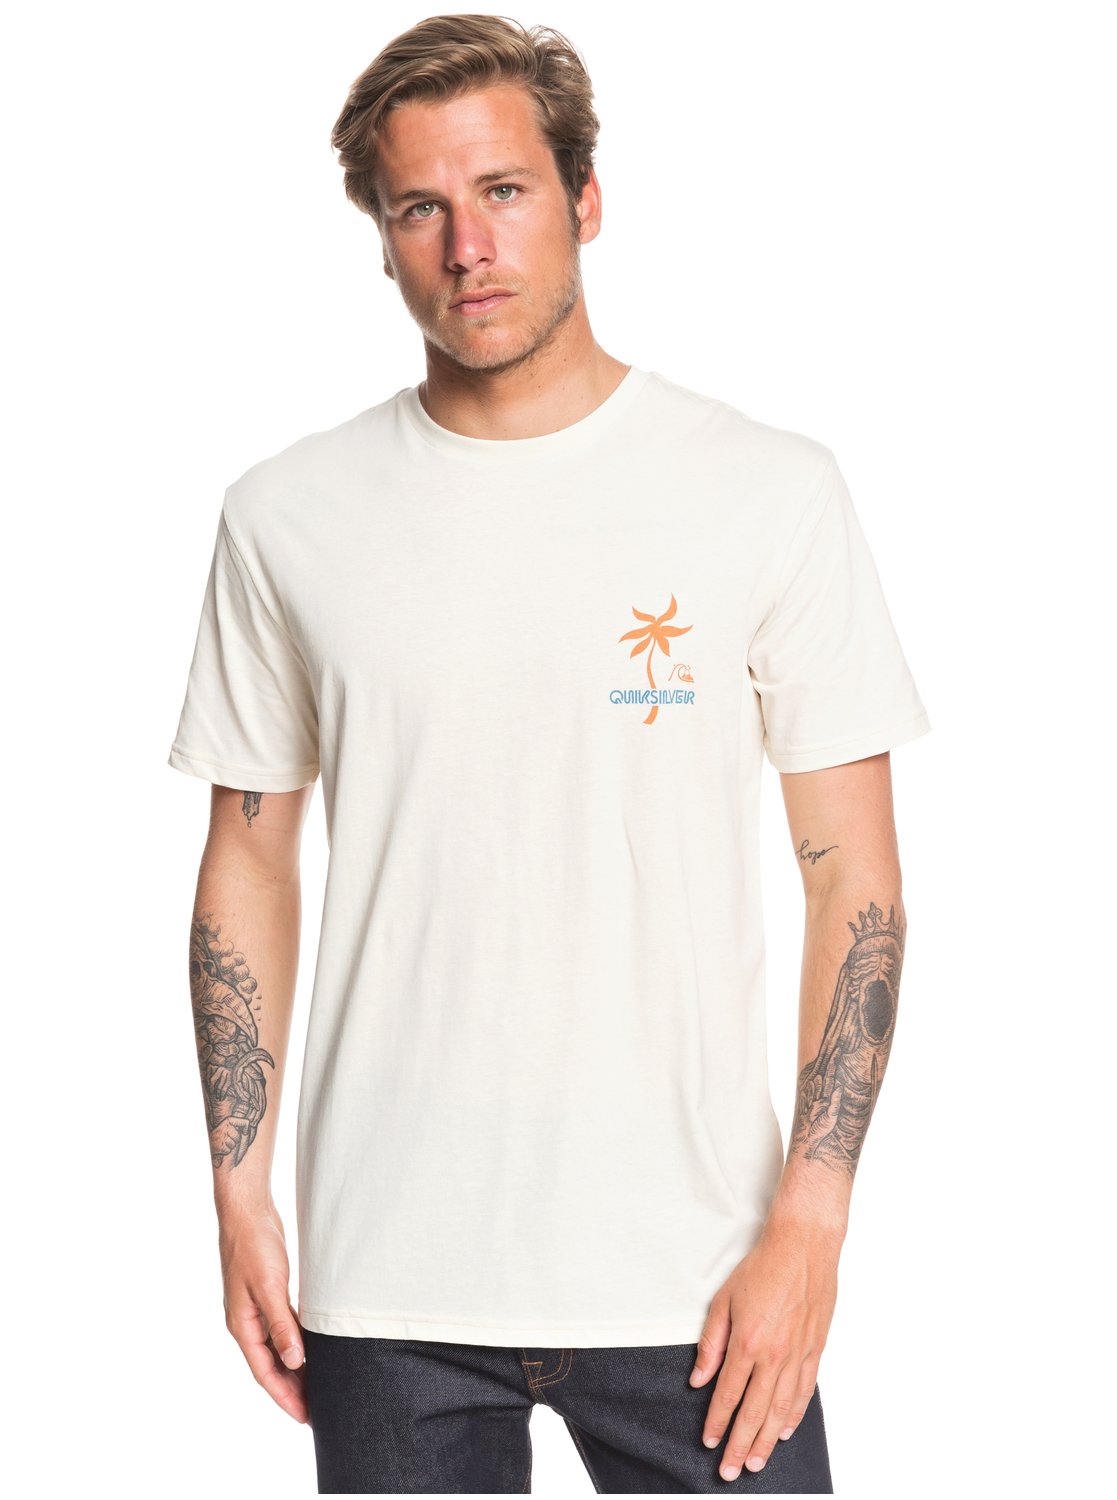 Quiksilver Board Palm Tee WCL0 S